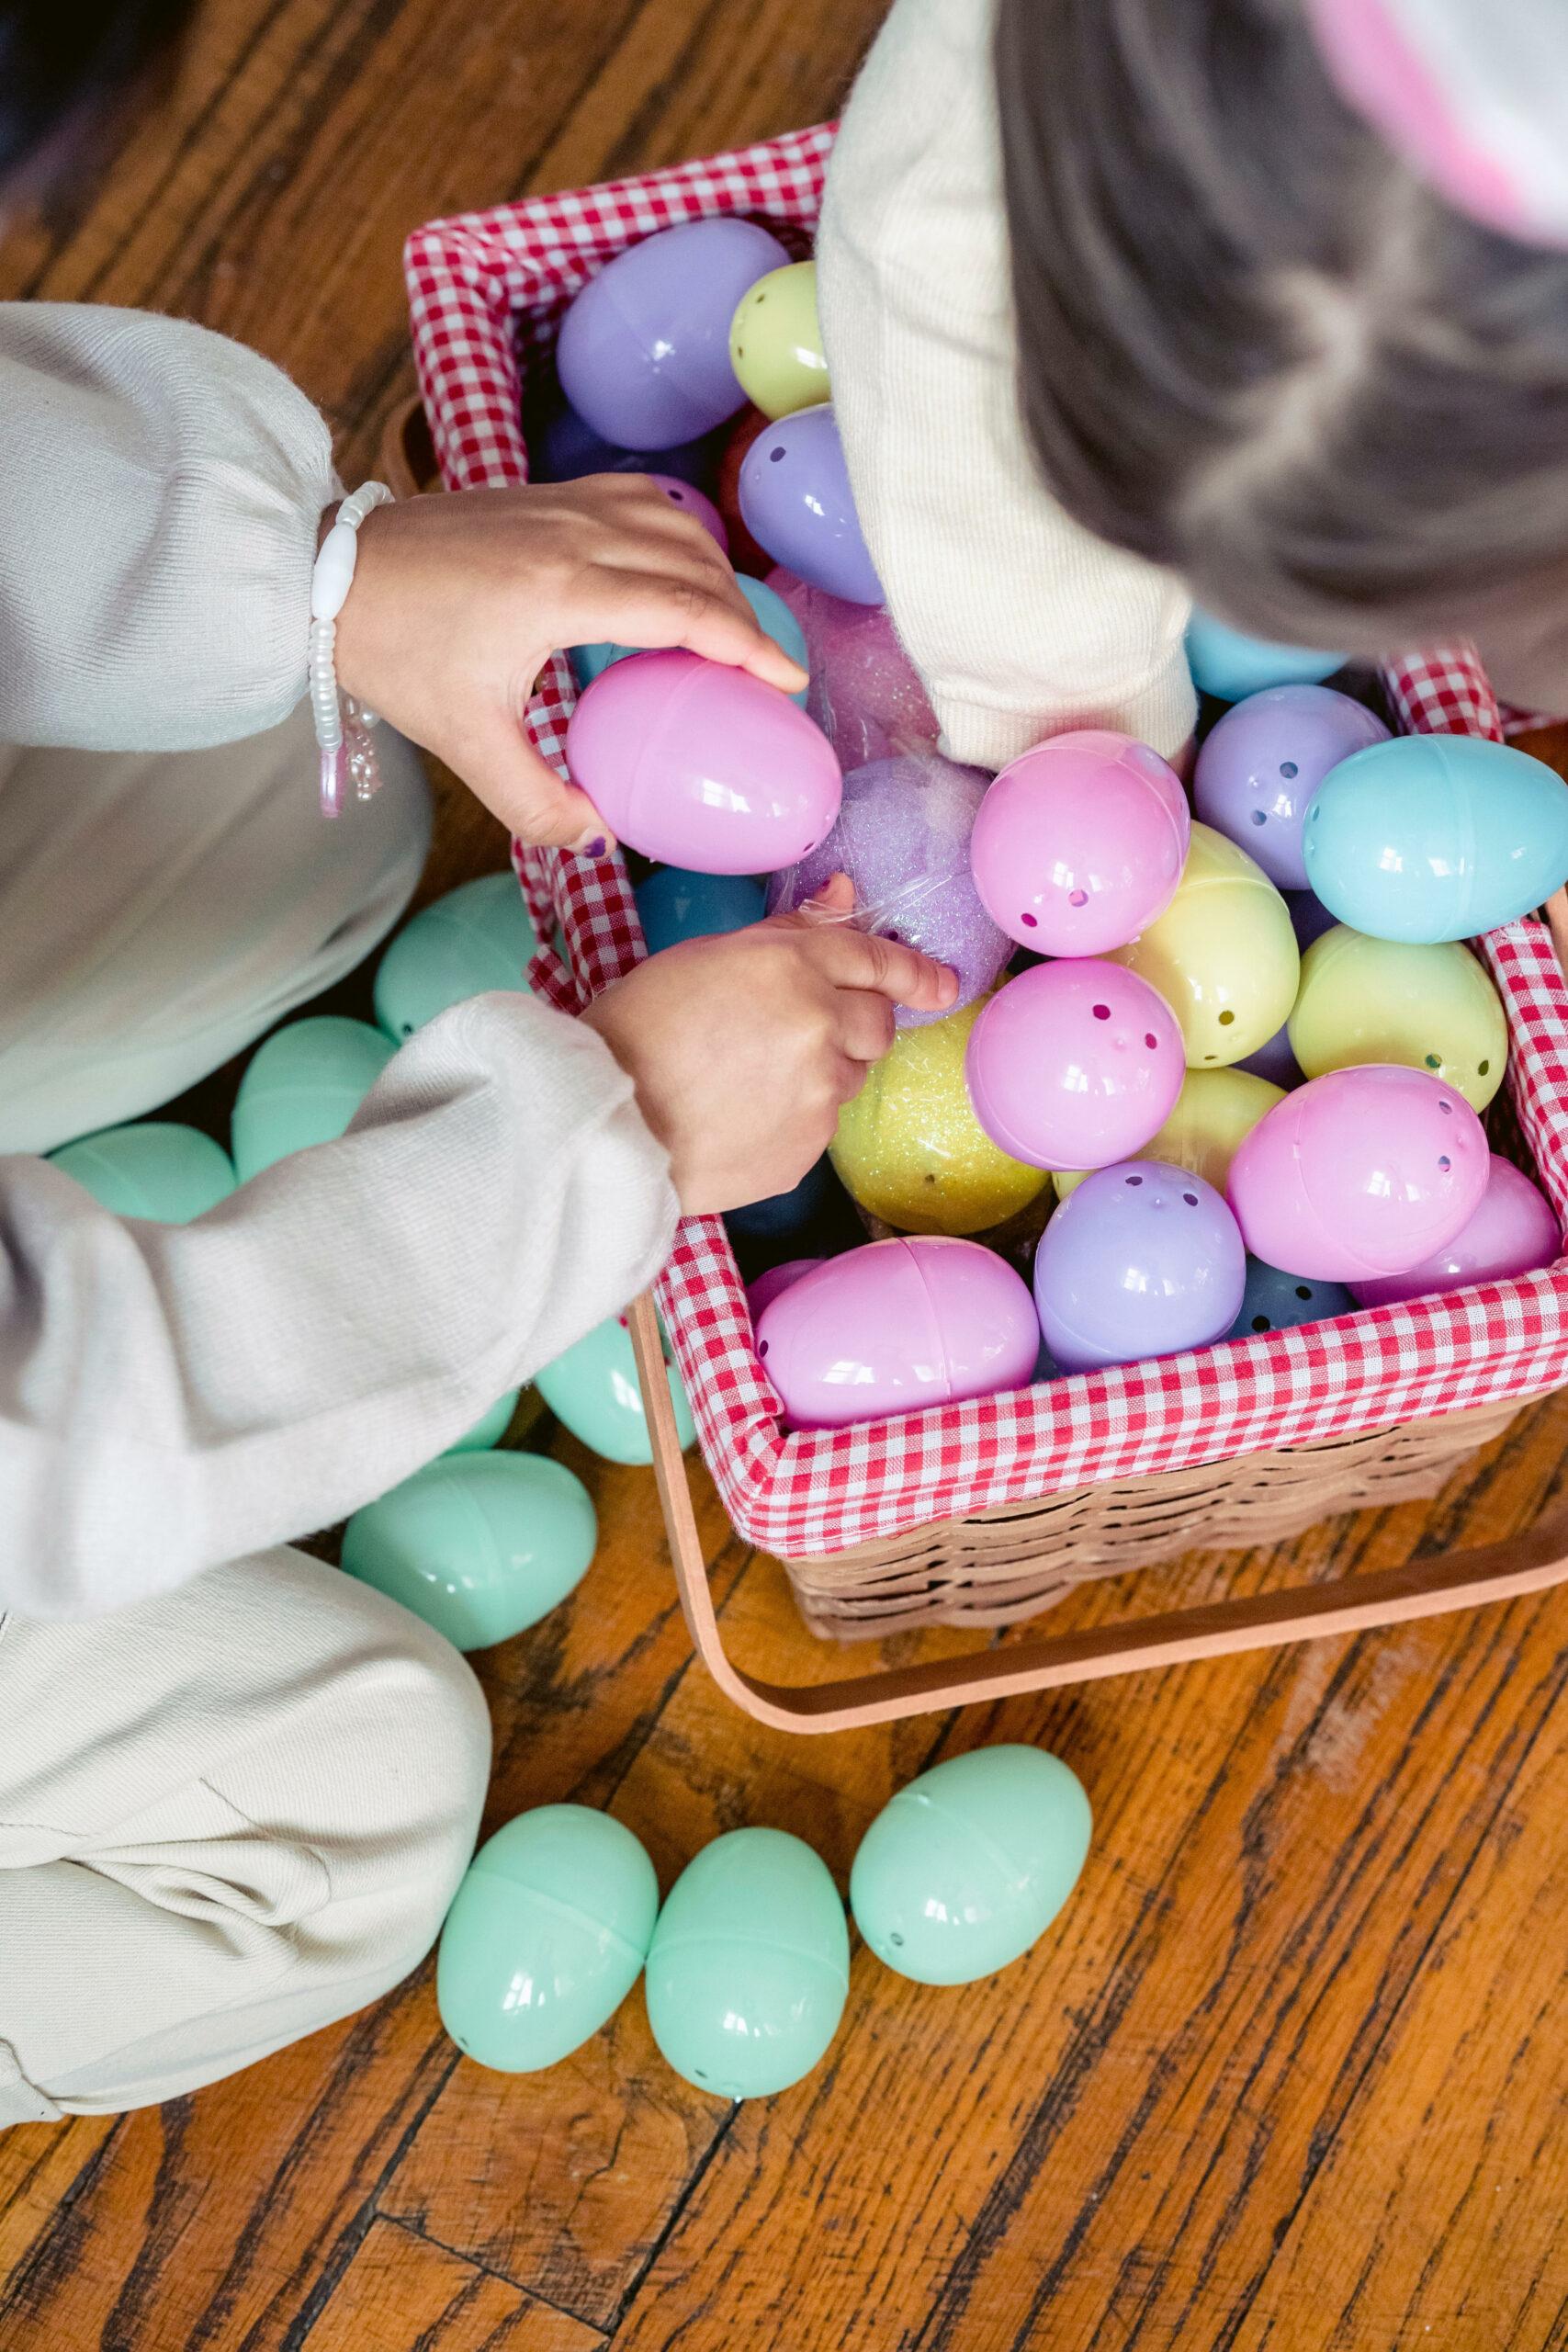 Filling an Easter basket with colorful eggs